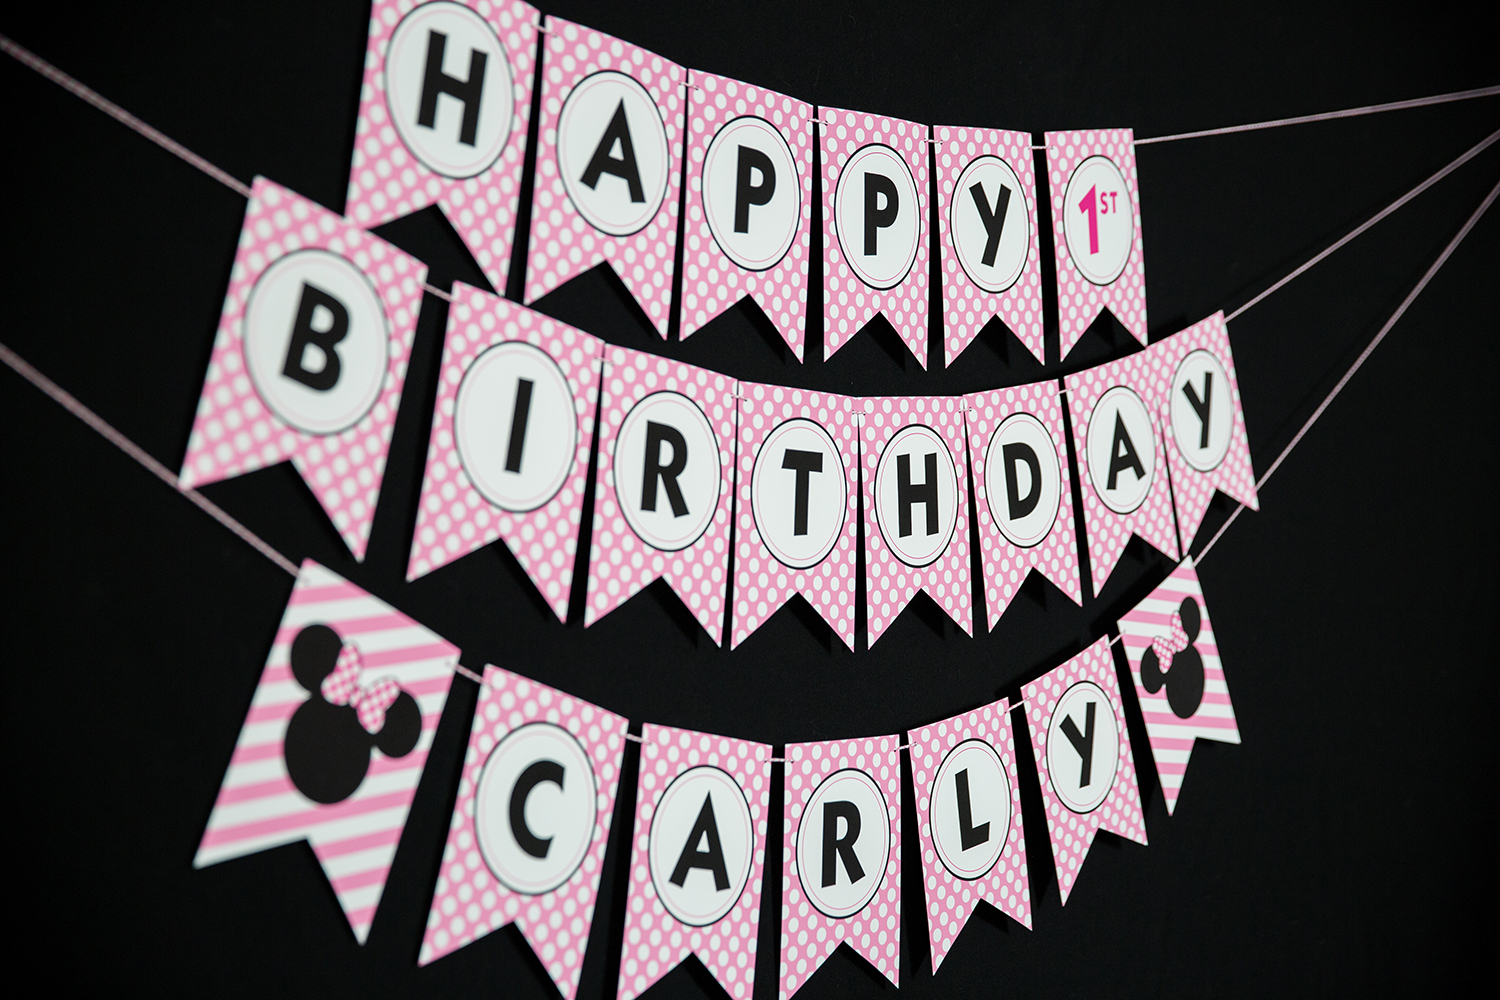 Free Printable Minnie Mouse Birthday Signs